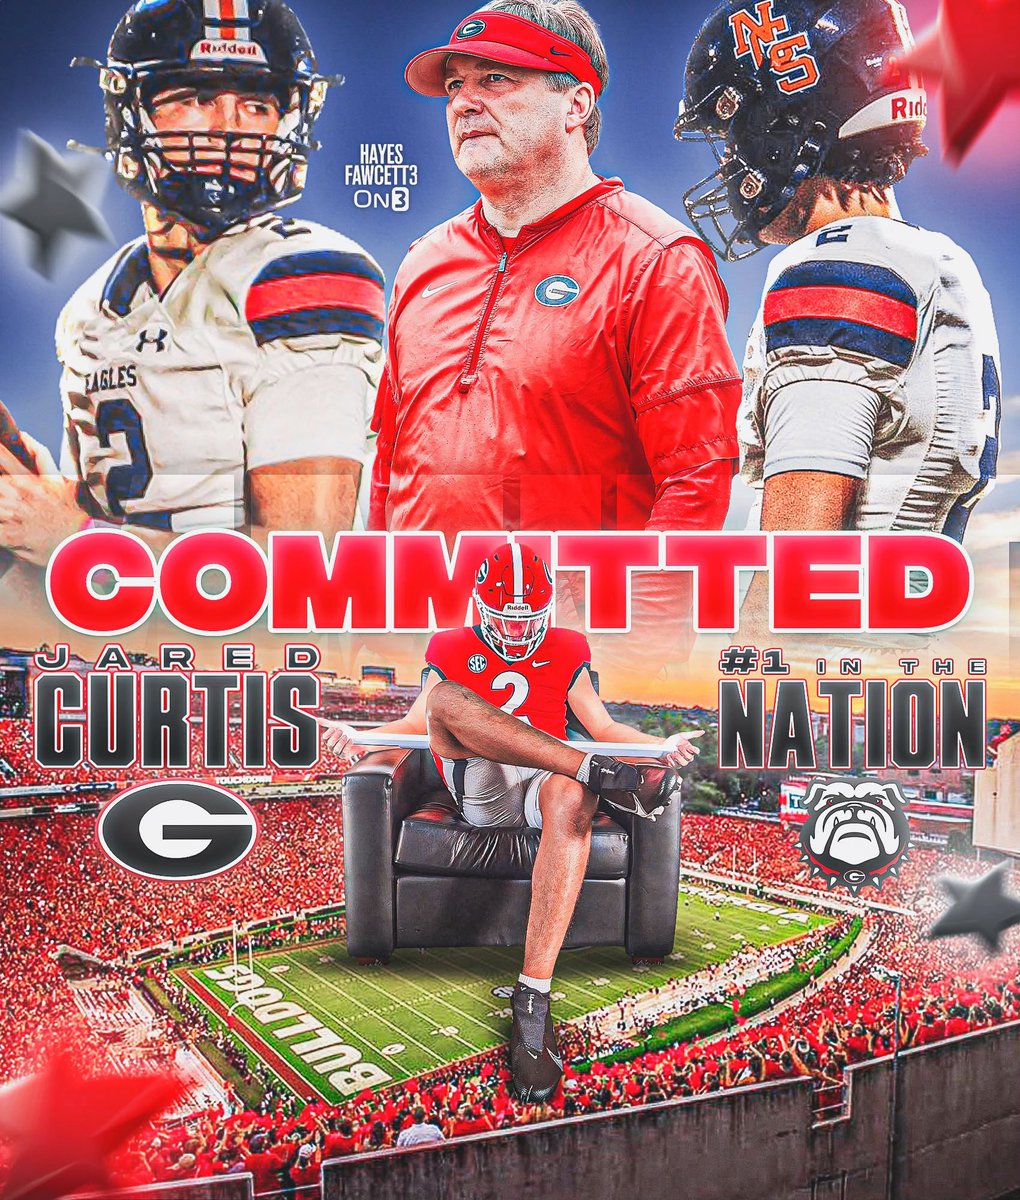 BREAKING: Elite 2026 QB Jared Curtis has Committed to Georgia, he tells me for @on3recruits The 6’4 225 QB from Nashville, TN chose the Bulldogs over Ohio State, Texas, Alabama, & Oklahoma Curtis is one of the Top signal-callers in the ‘26 Class (per On3) “I’m home! Go